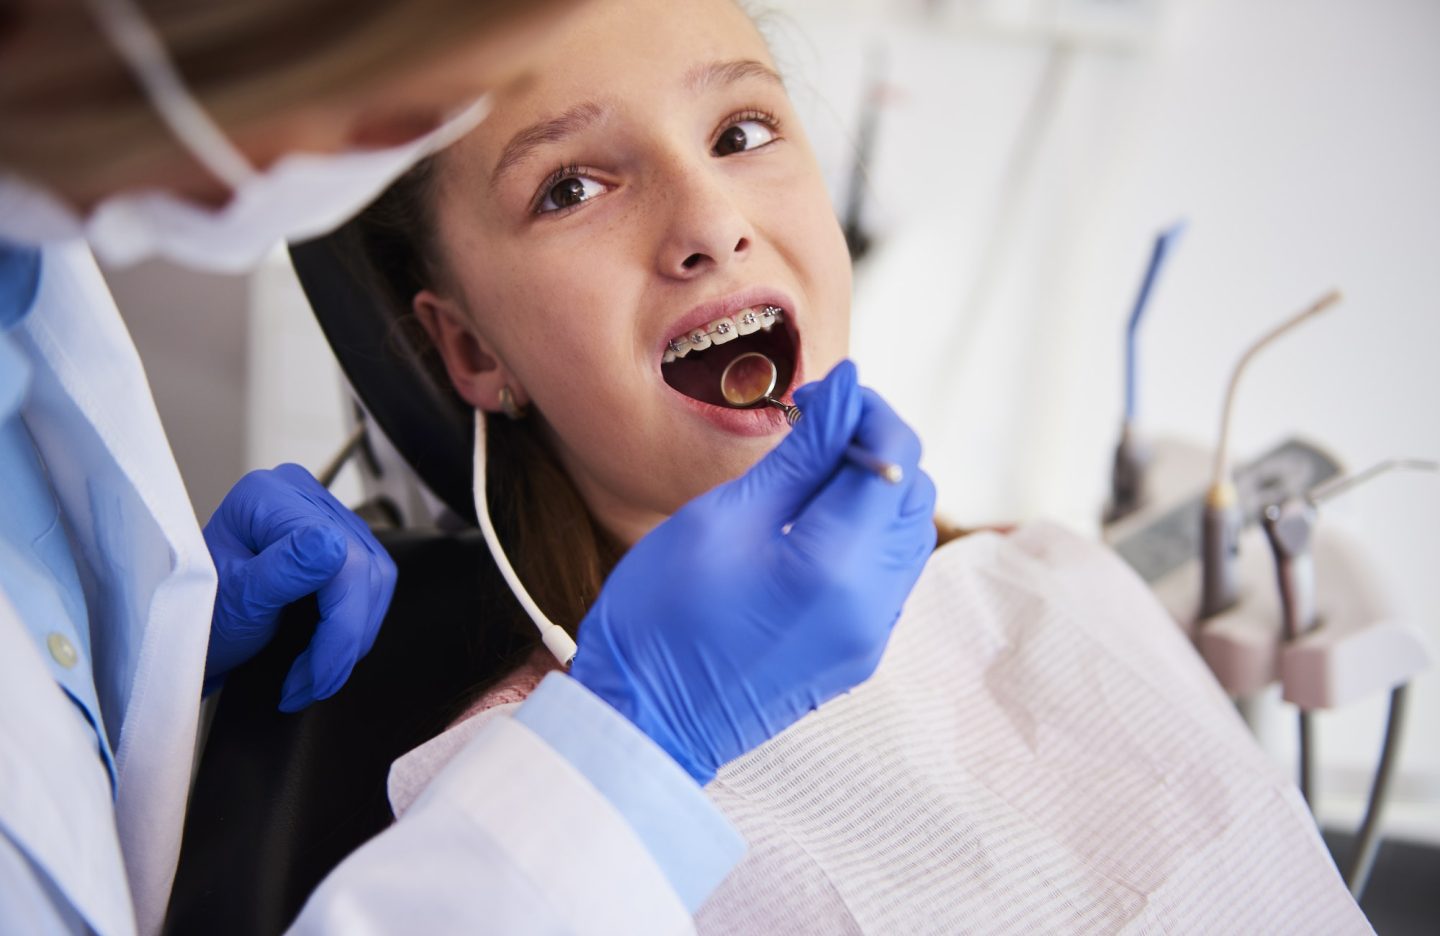 Part of orthodontist examining child's teeth in dentist's office